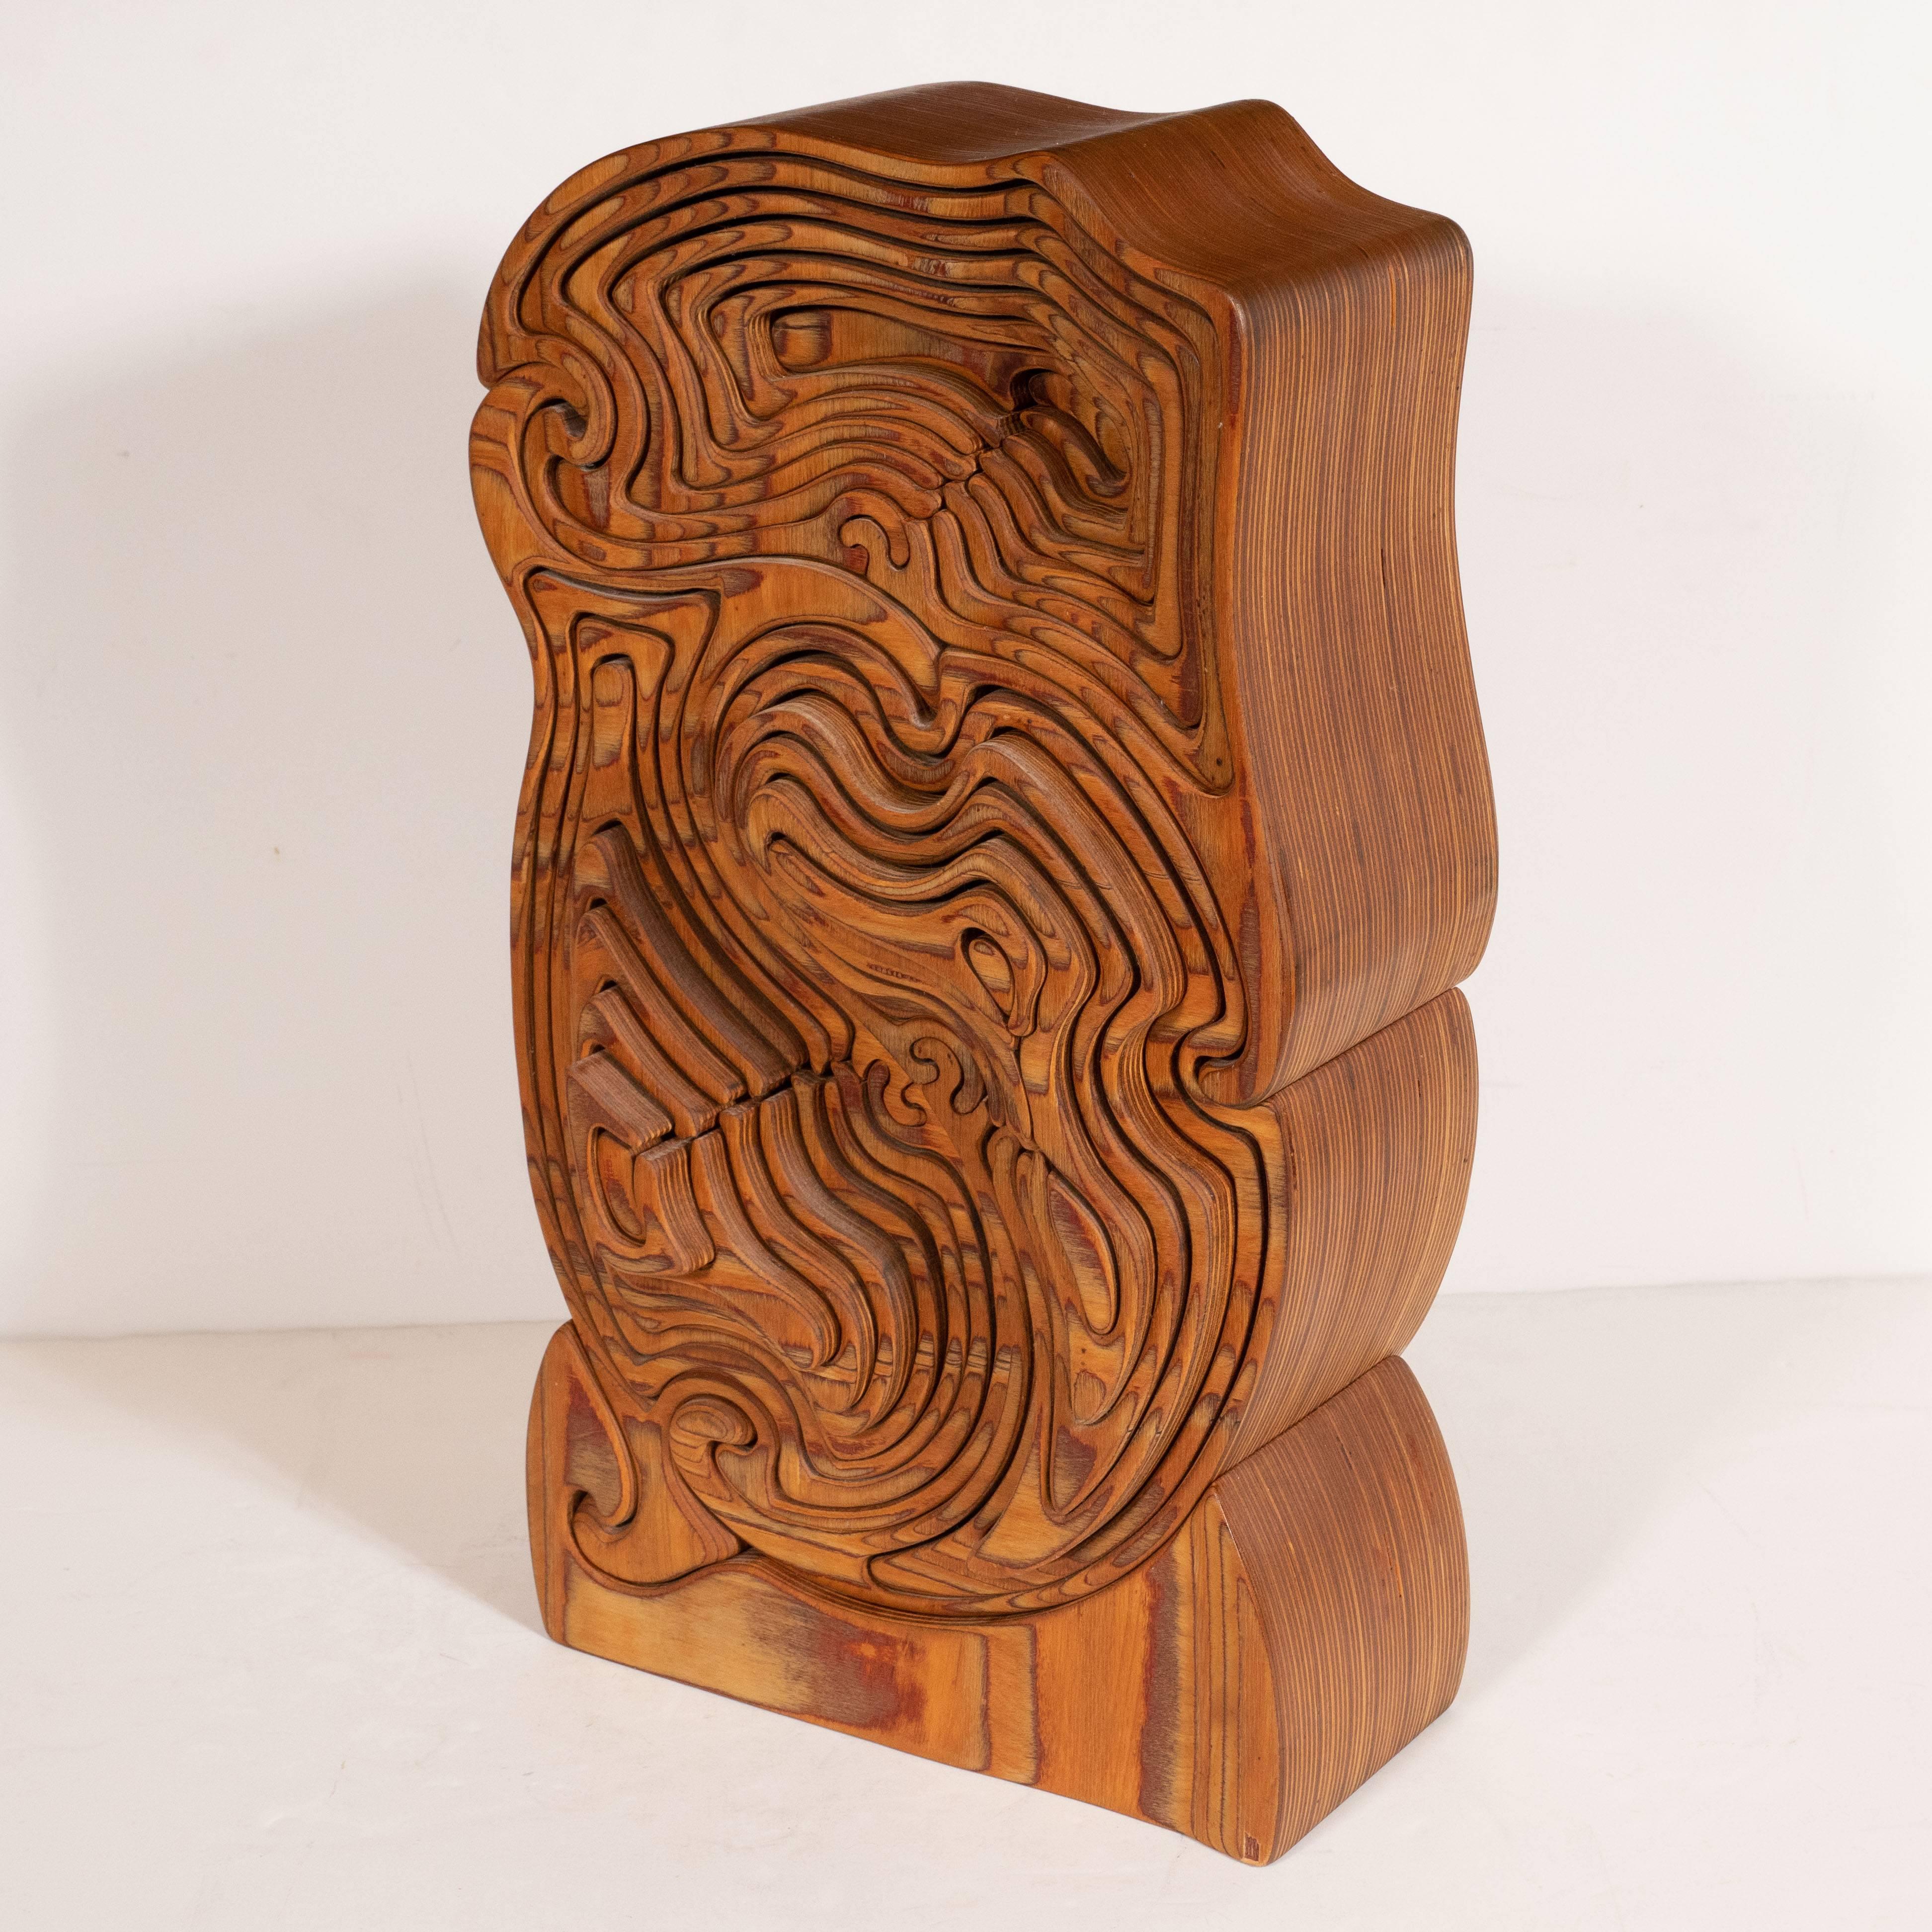 Carved Mid-Century Modern Abstract Dynamic Olive Wood Puzzle Sculpture